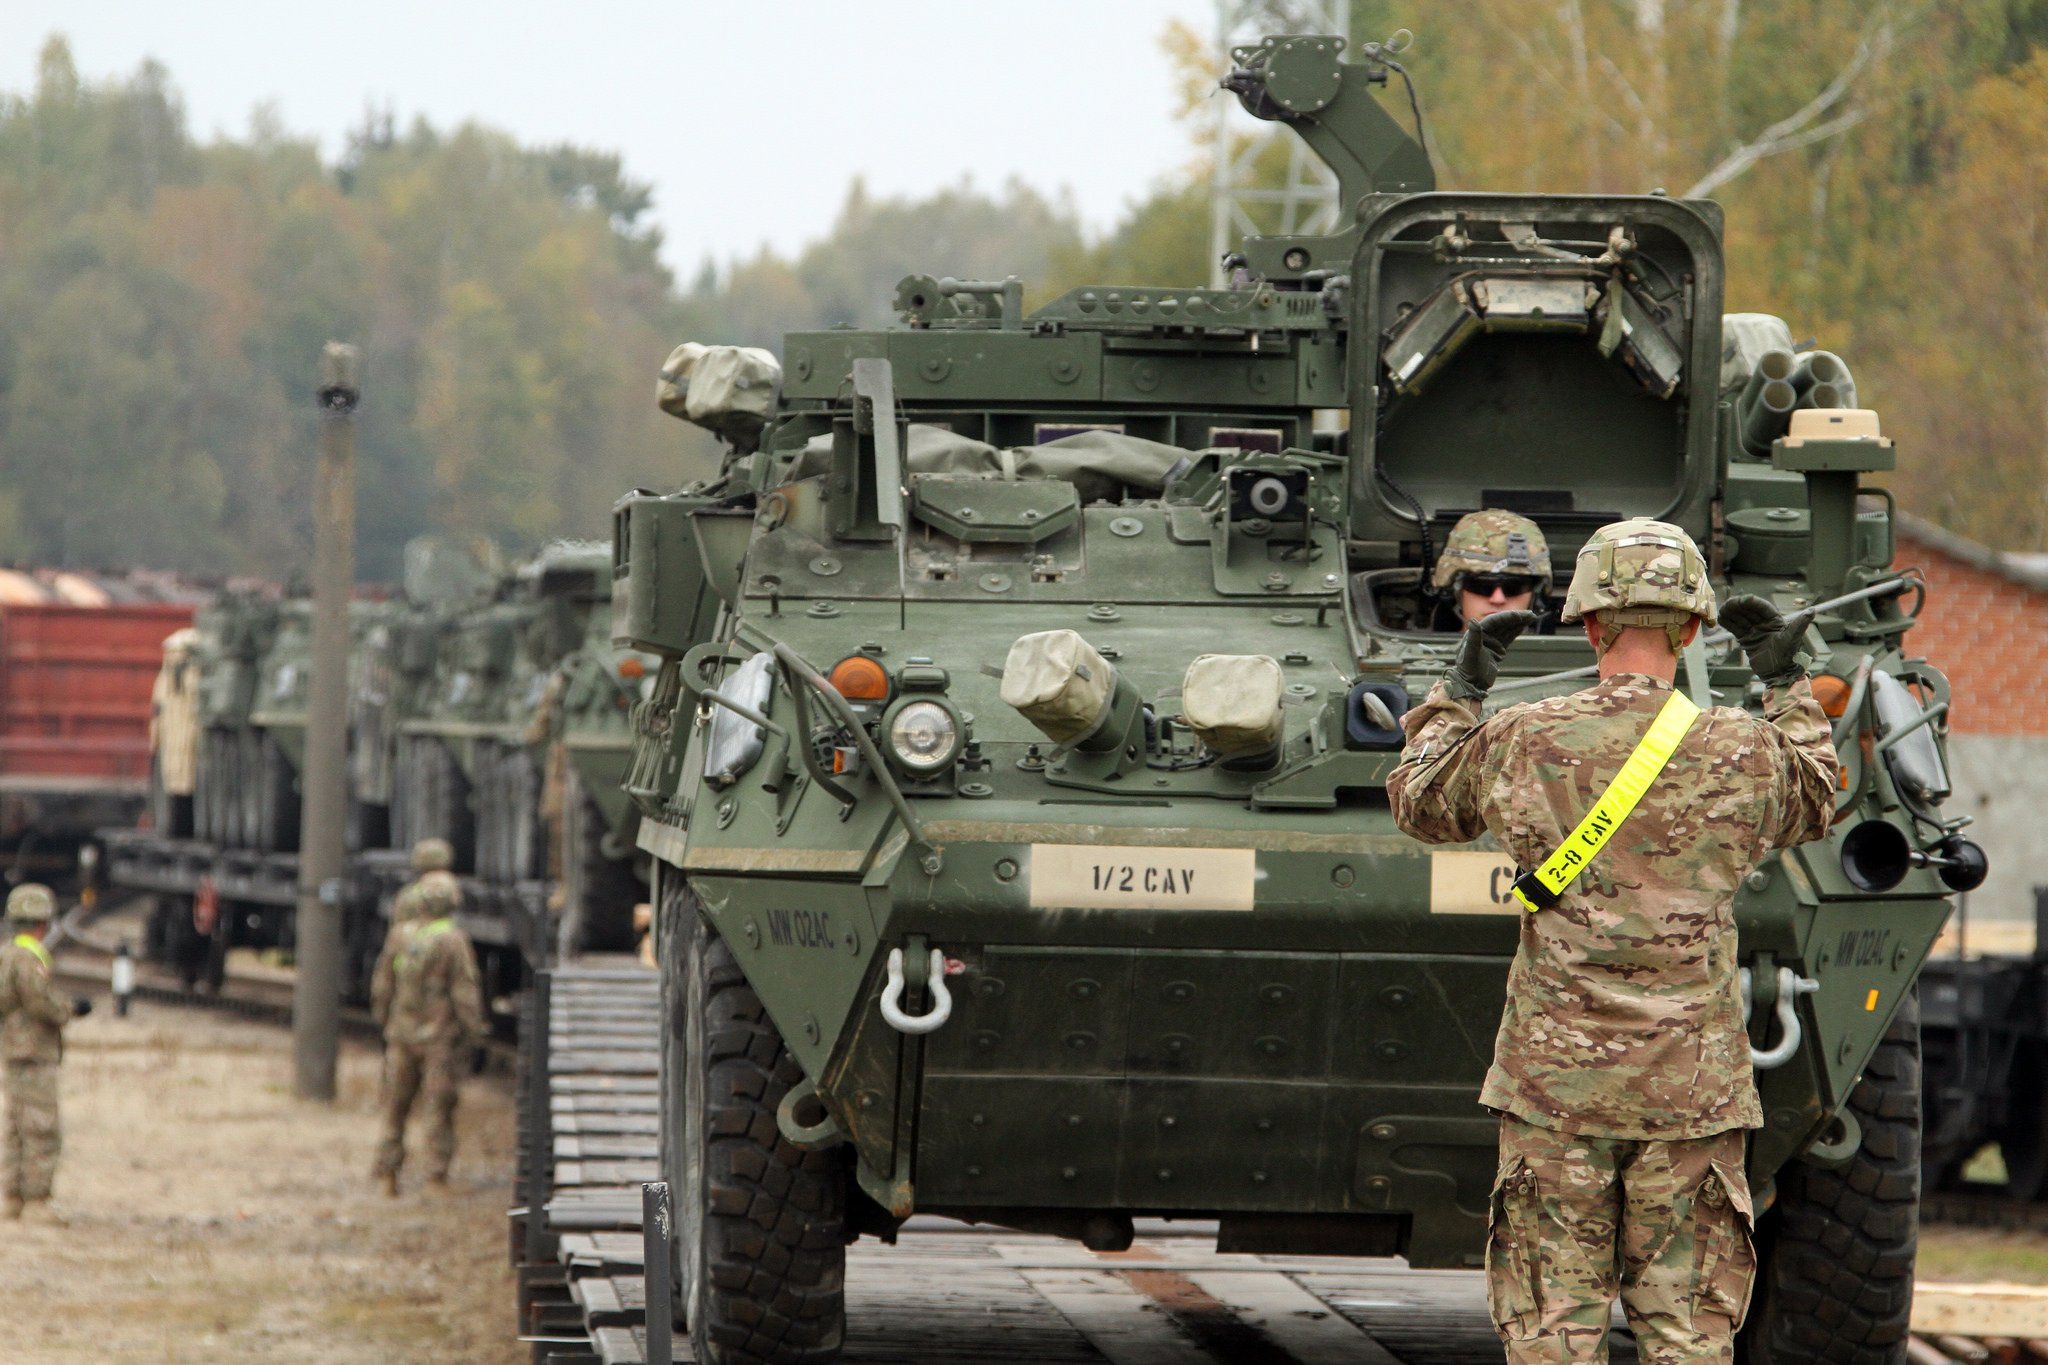 U.S. Army Soldiers with 6th Squadron, 8th Cavalry Regiment